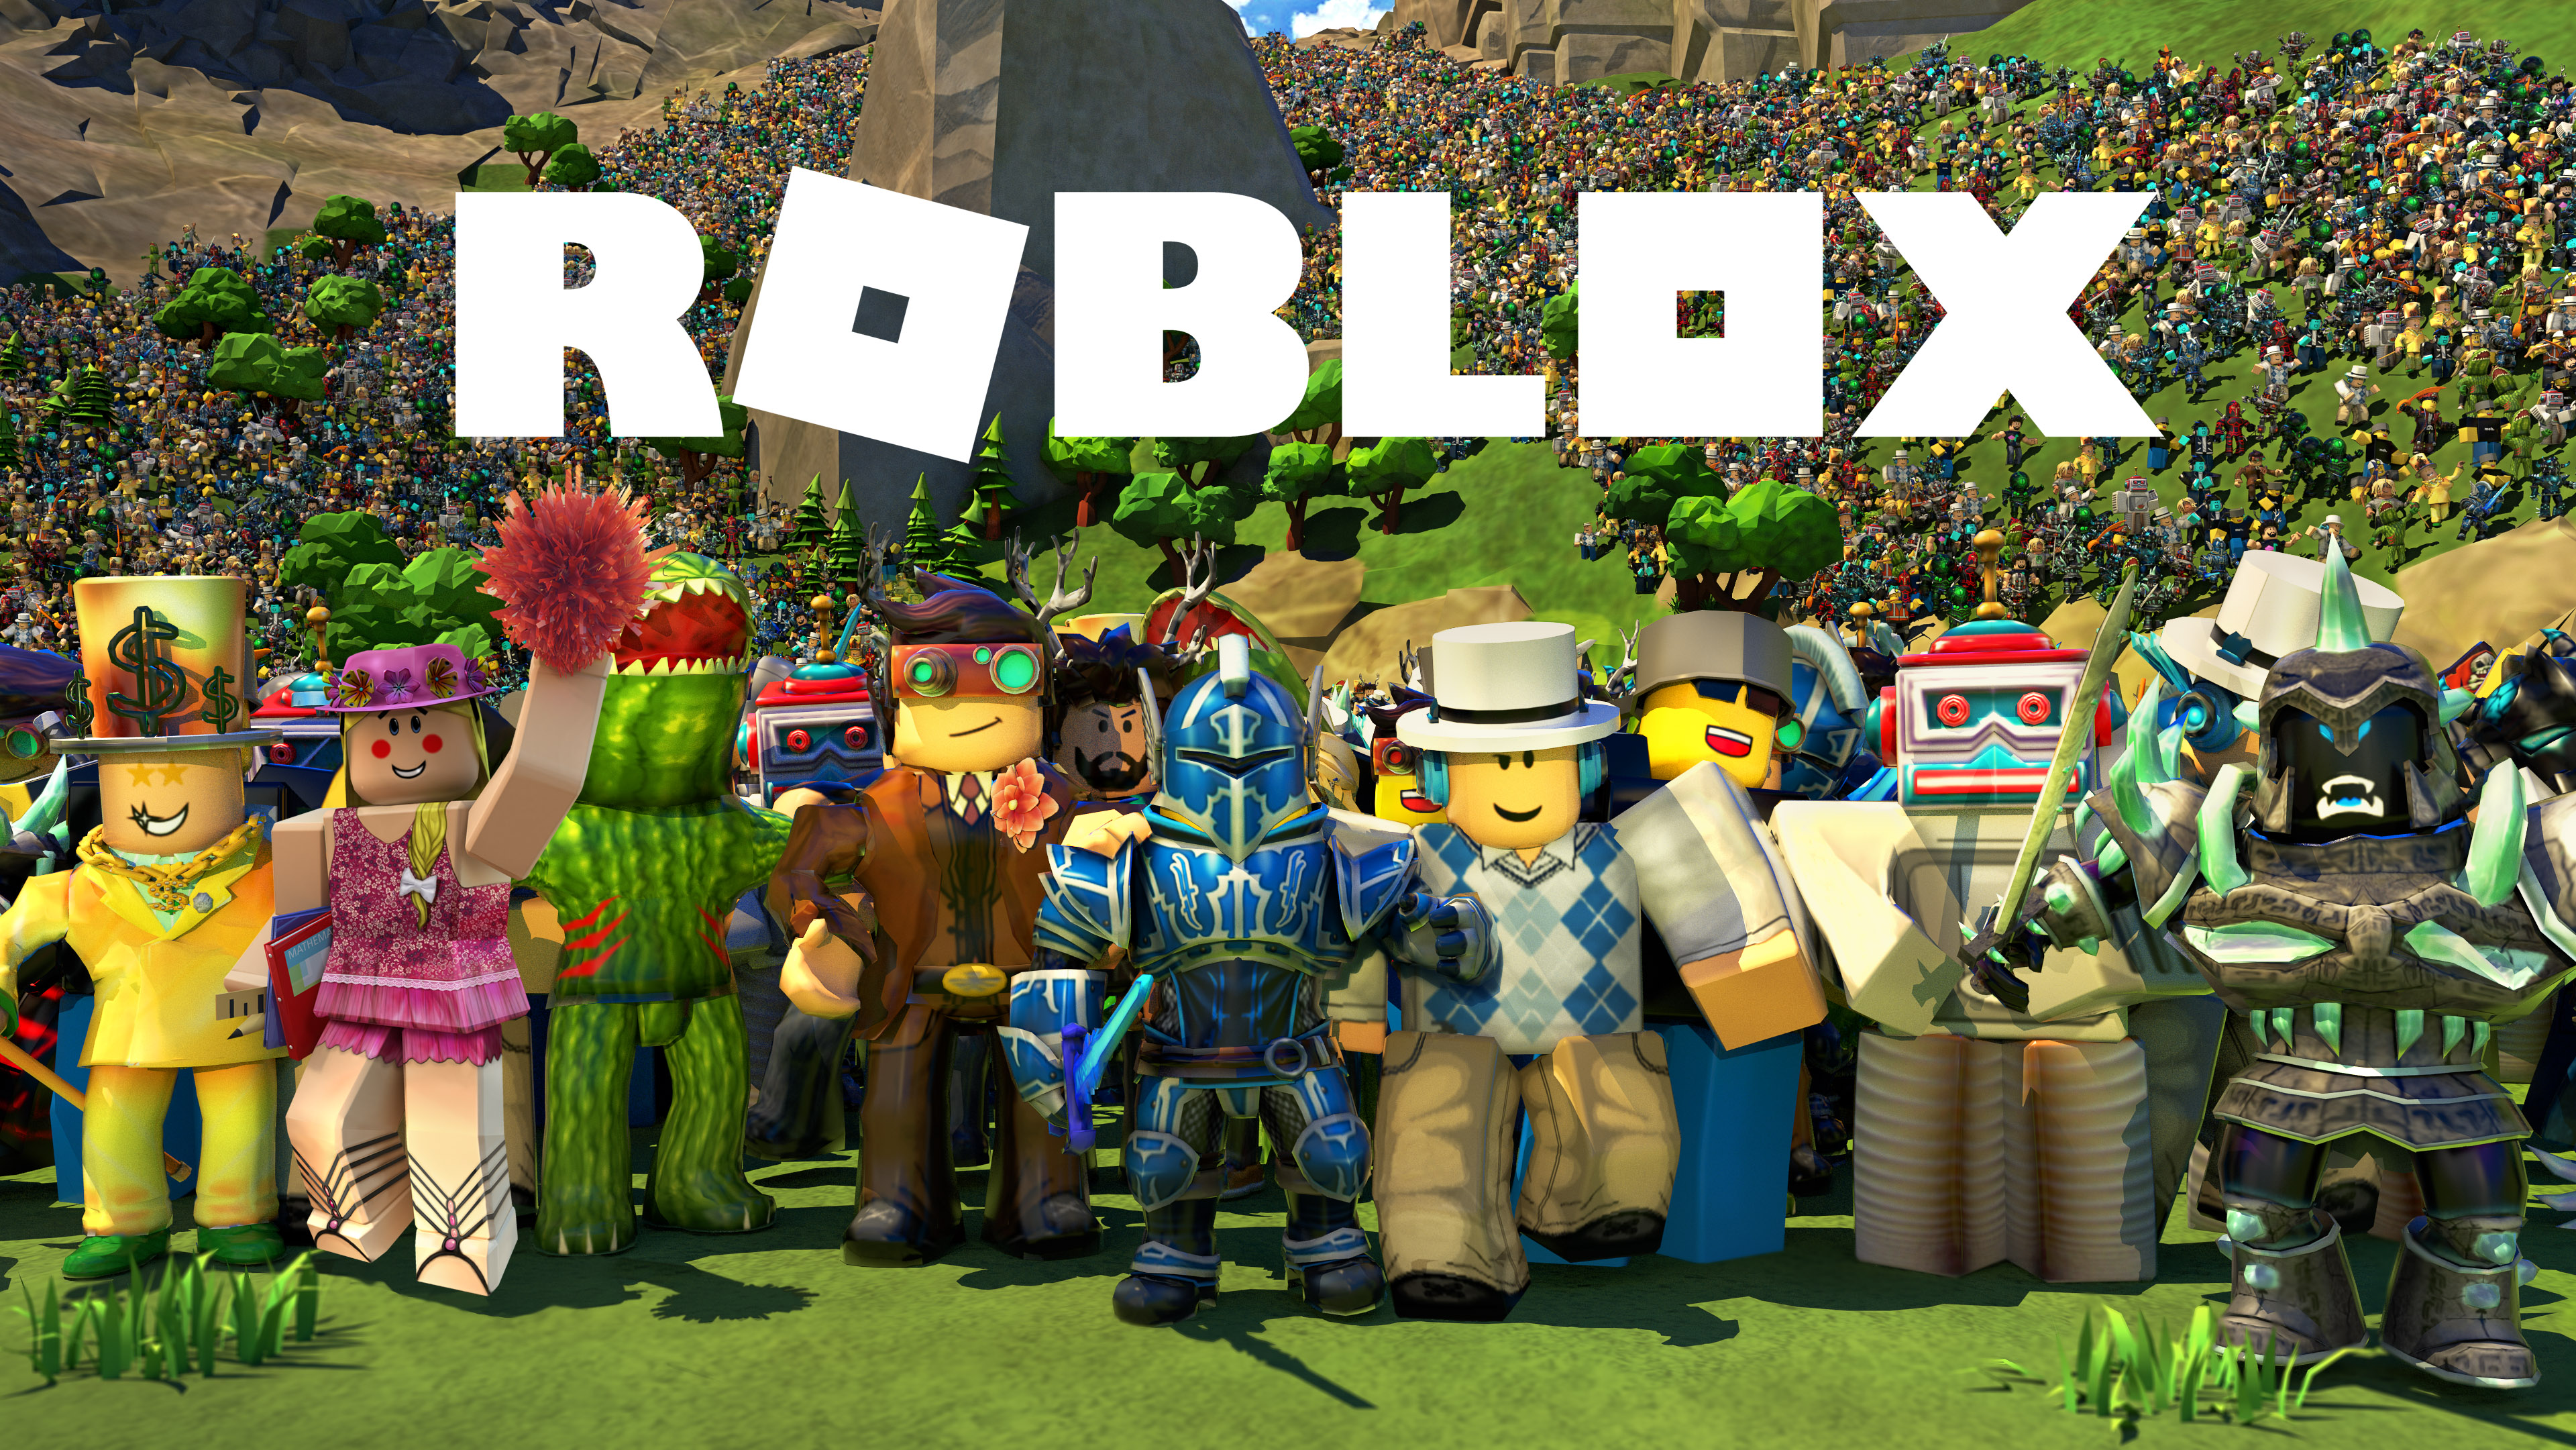 Roblox Games: Best Free New Games of 2017 So Far